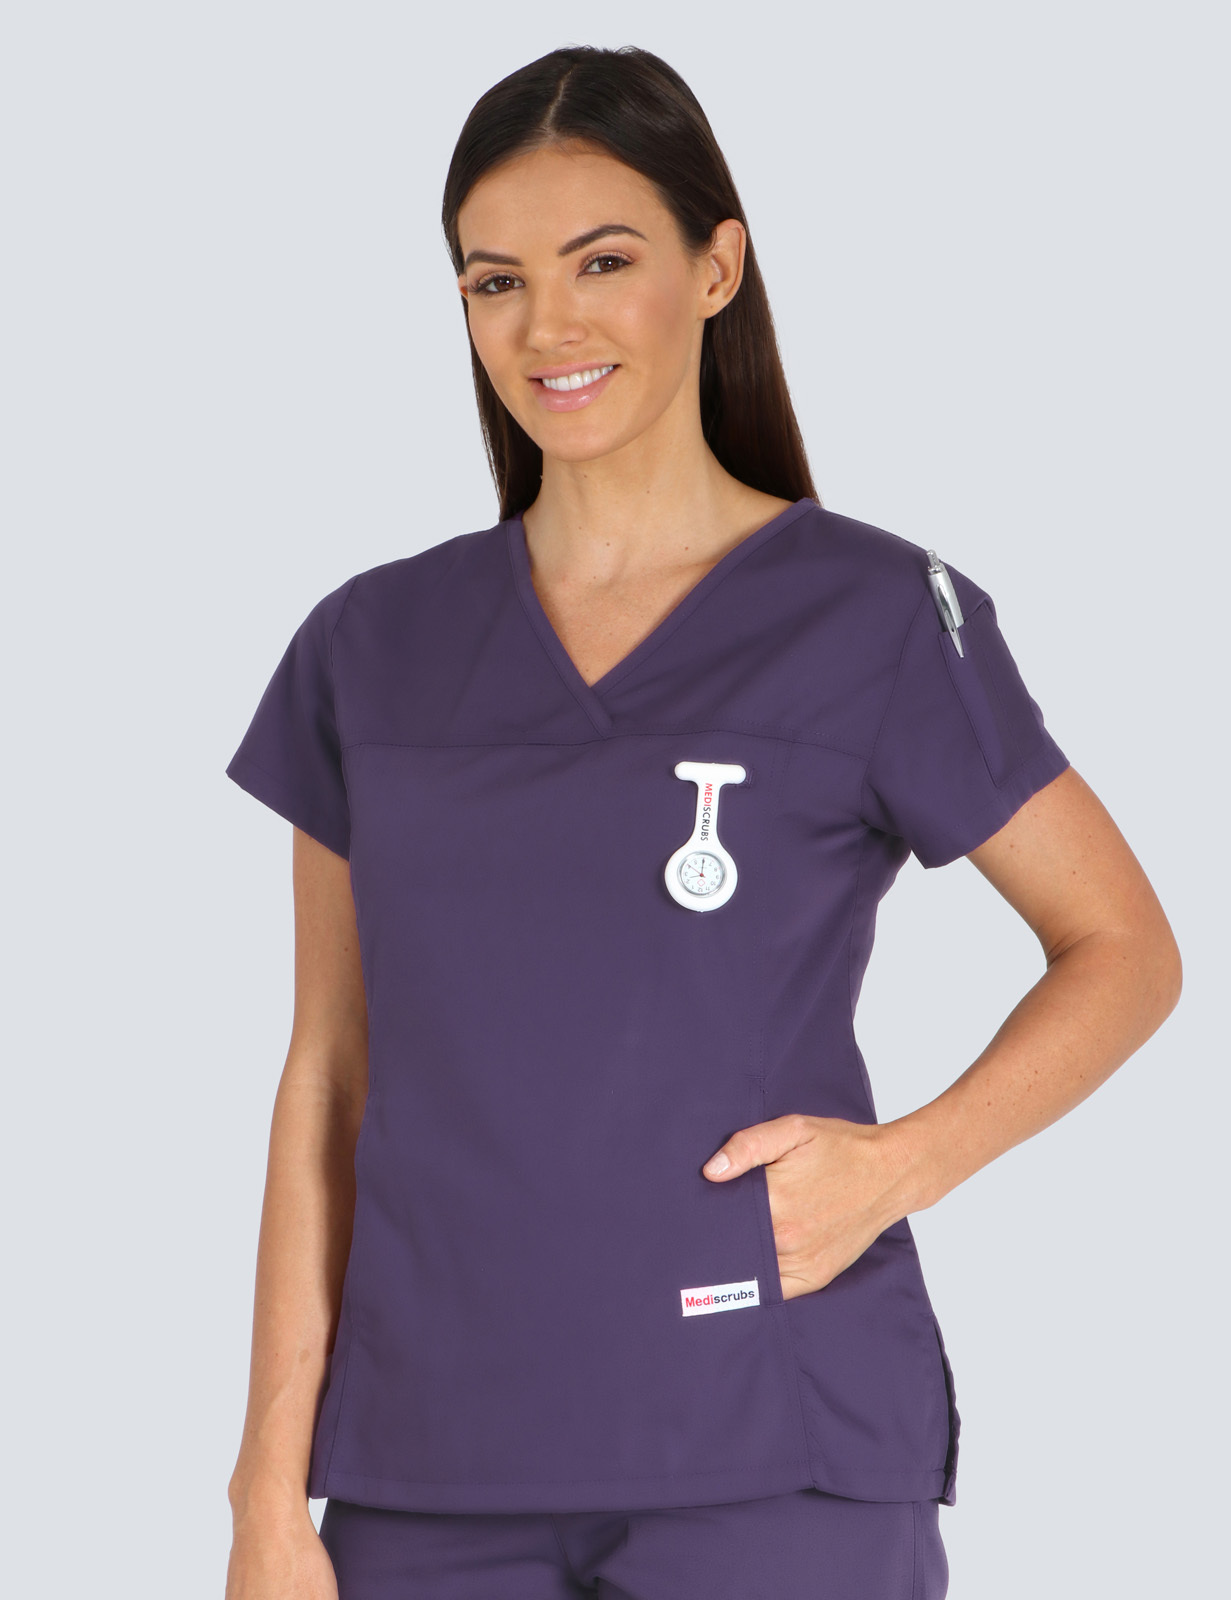 The Park - Centre for Mental Health - Pharmacy Top only Bundle (Women's Fit Solid Top incl Logo)